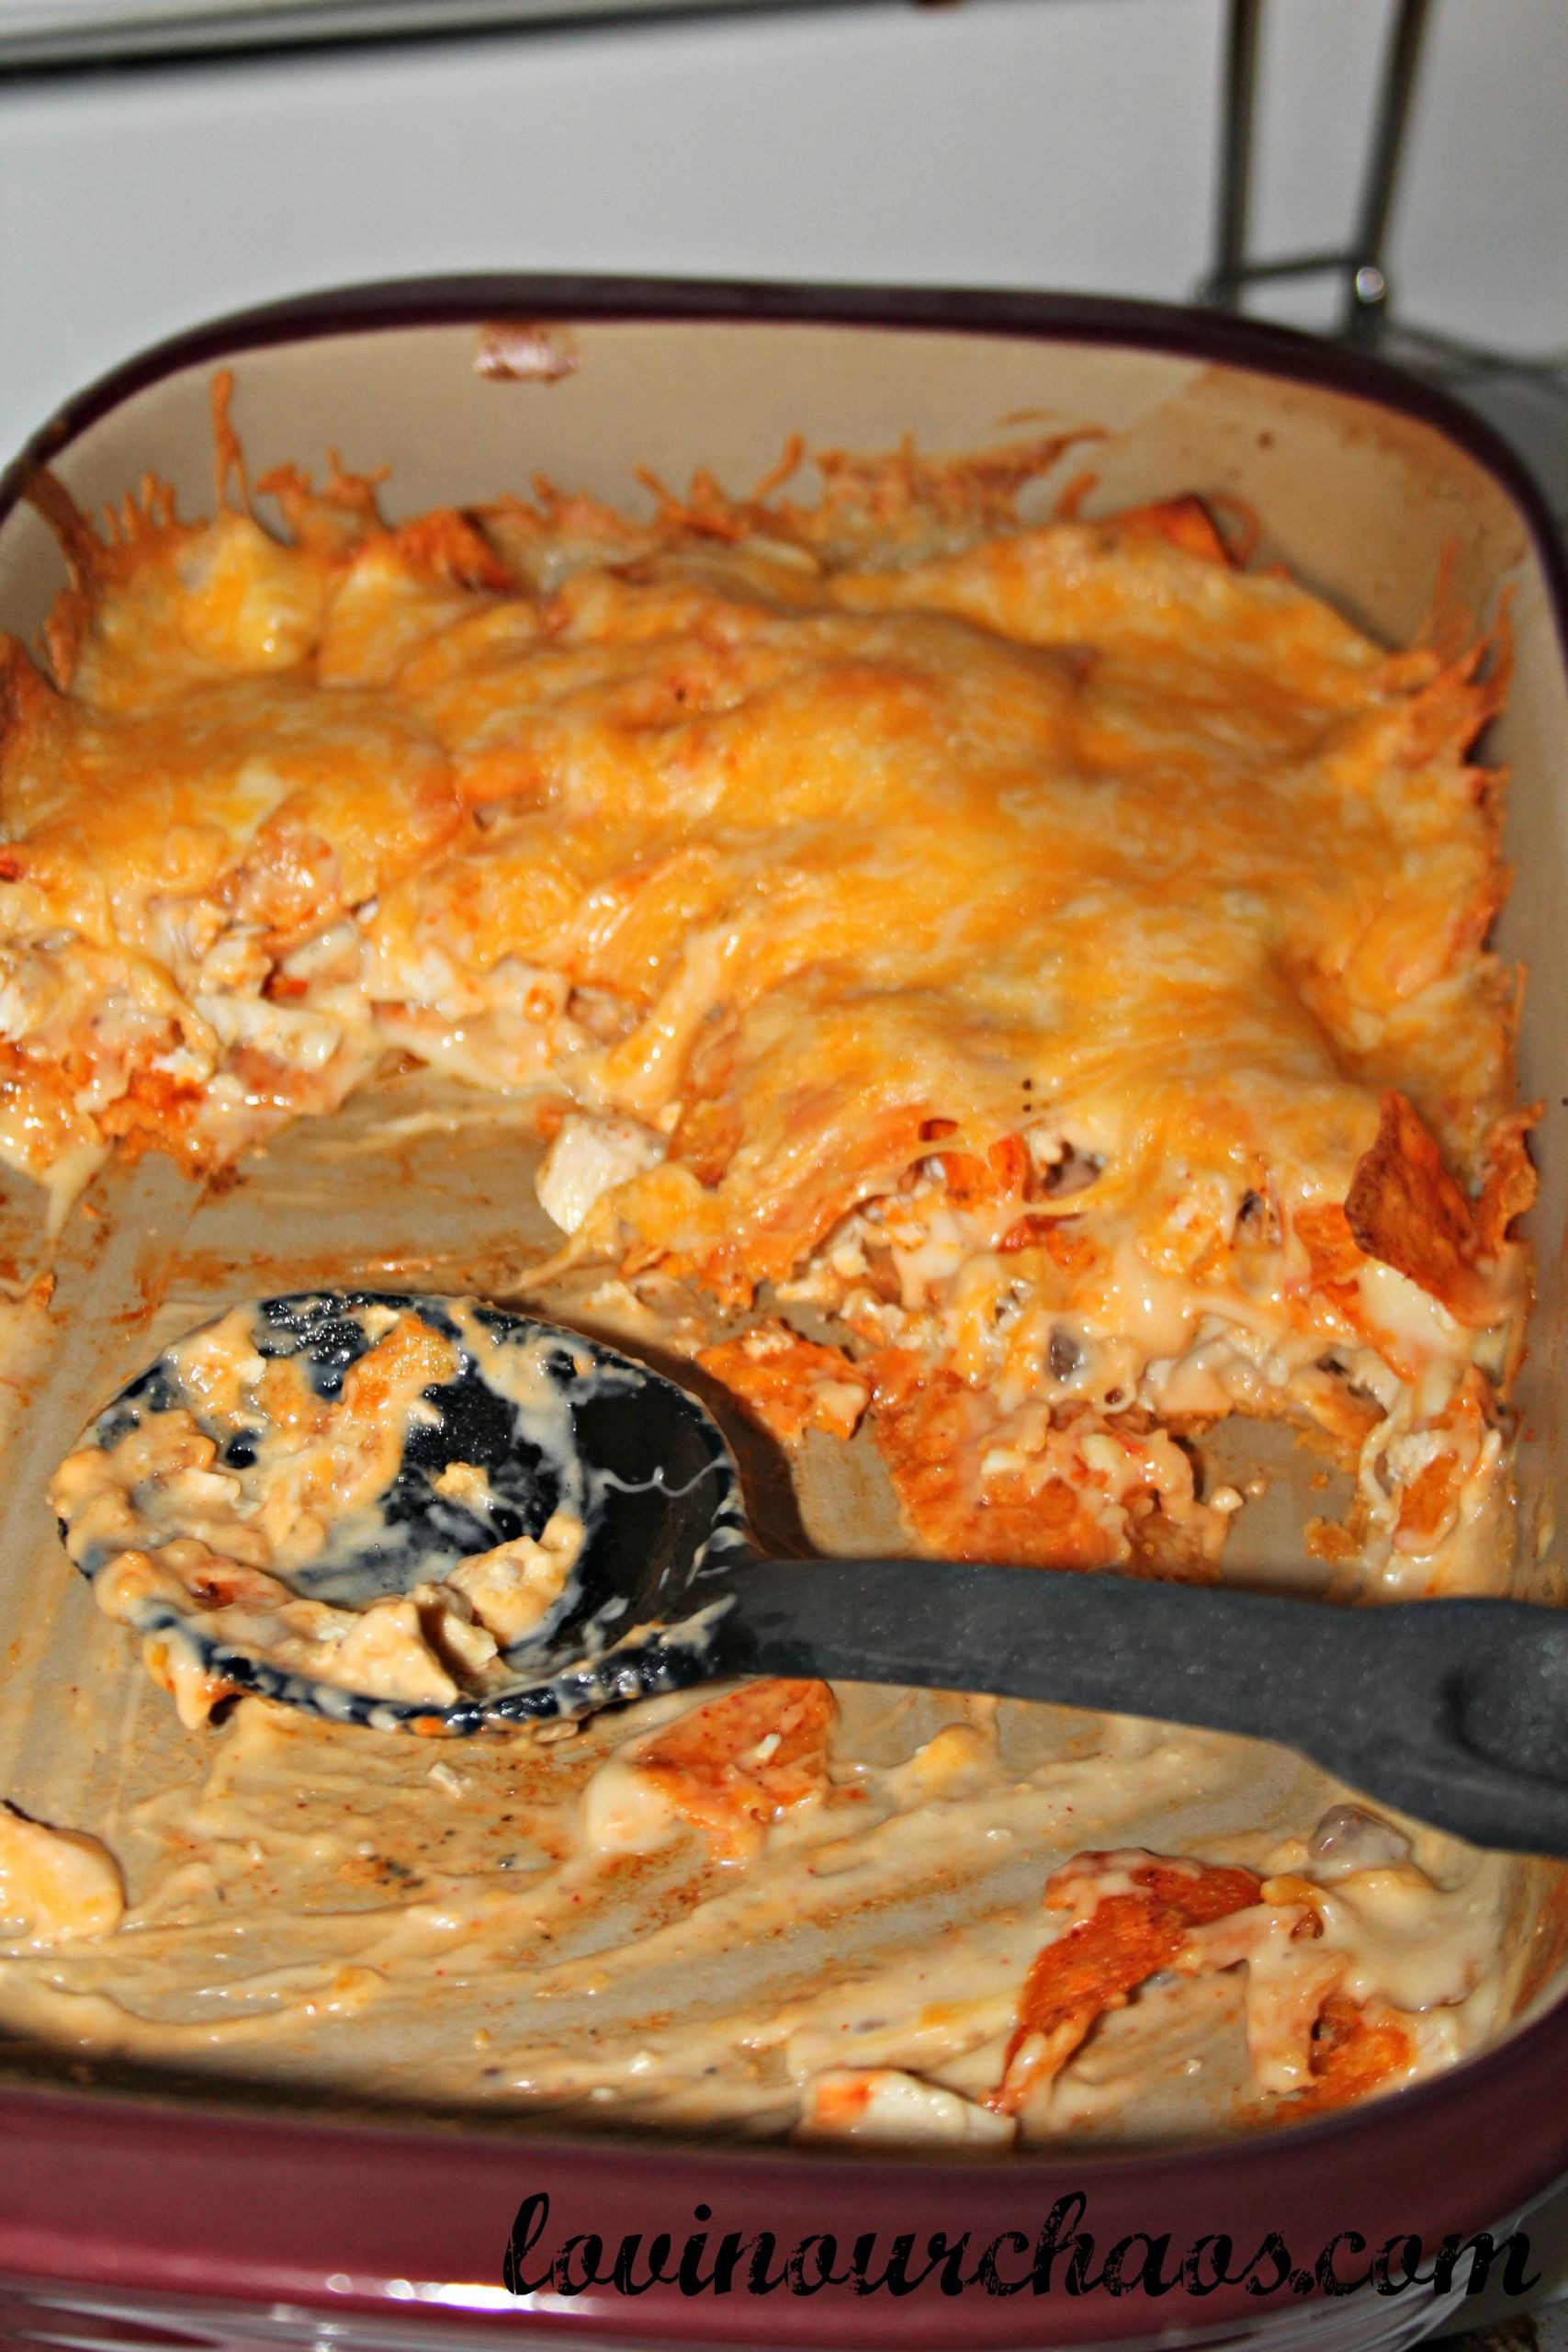 Mexican Chicken Casserole With Doritos And Velveeta
 cheesy chicken dorito casserole with velveeta